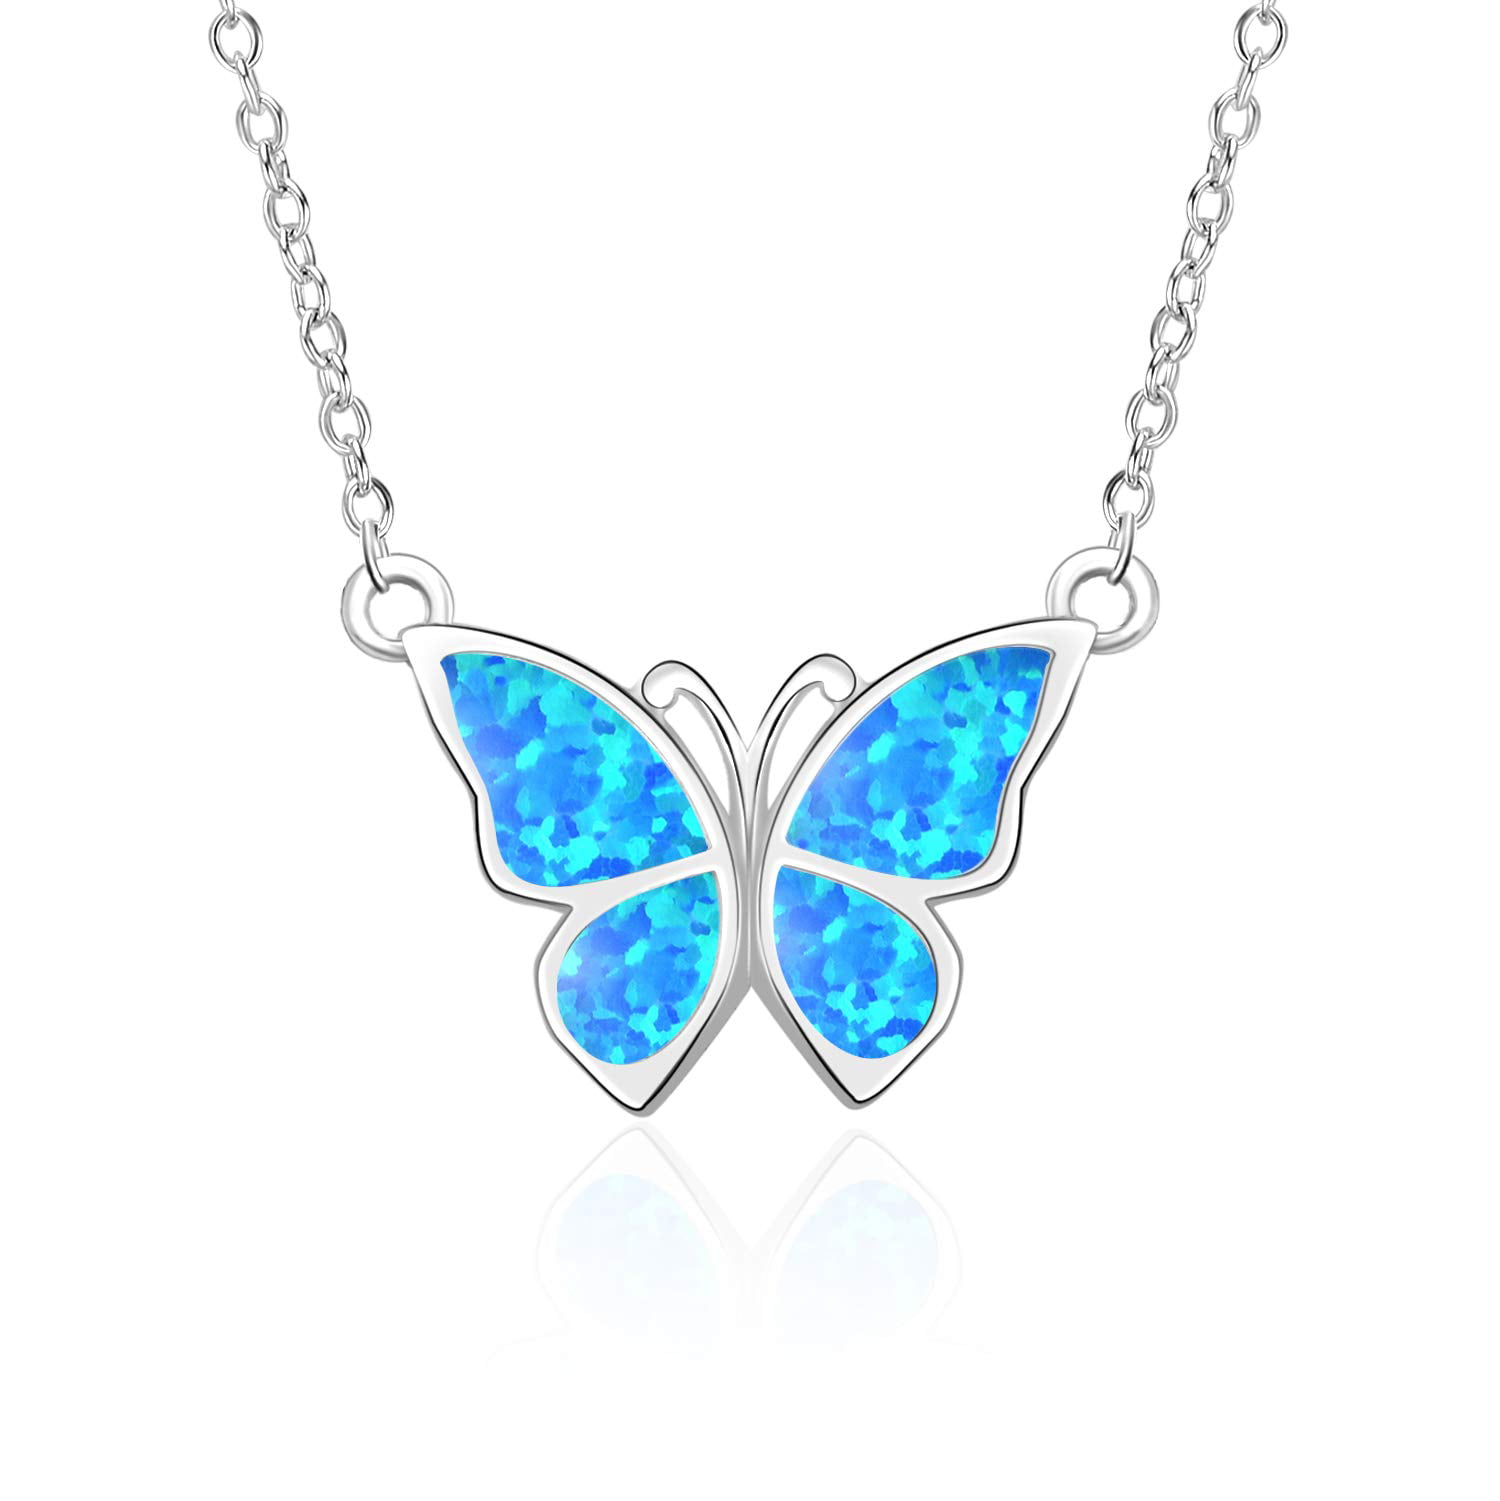 Opal Butterfly Pendant Sterling Silver Necklace Blue White Opal Jewelry Gift